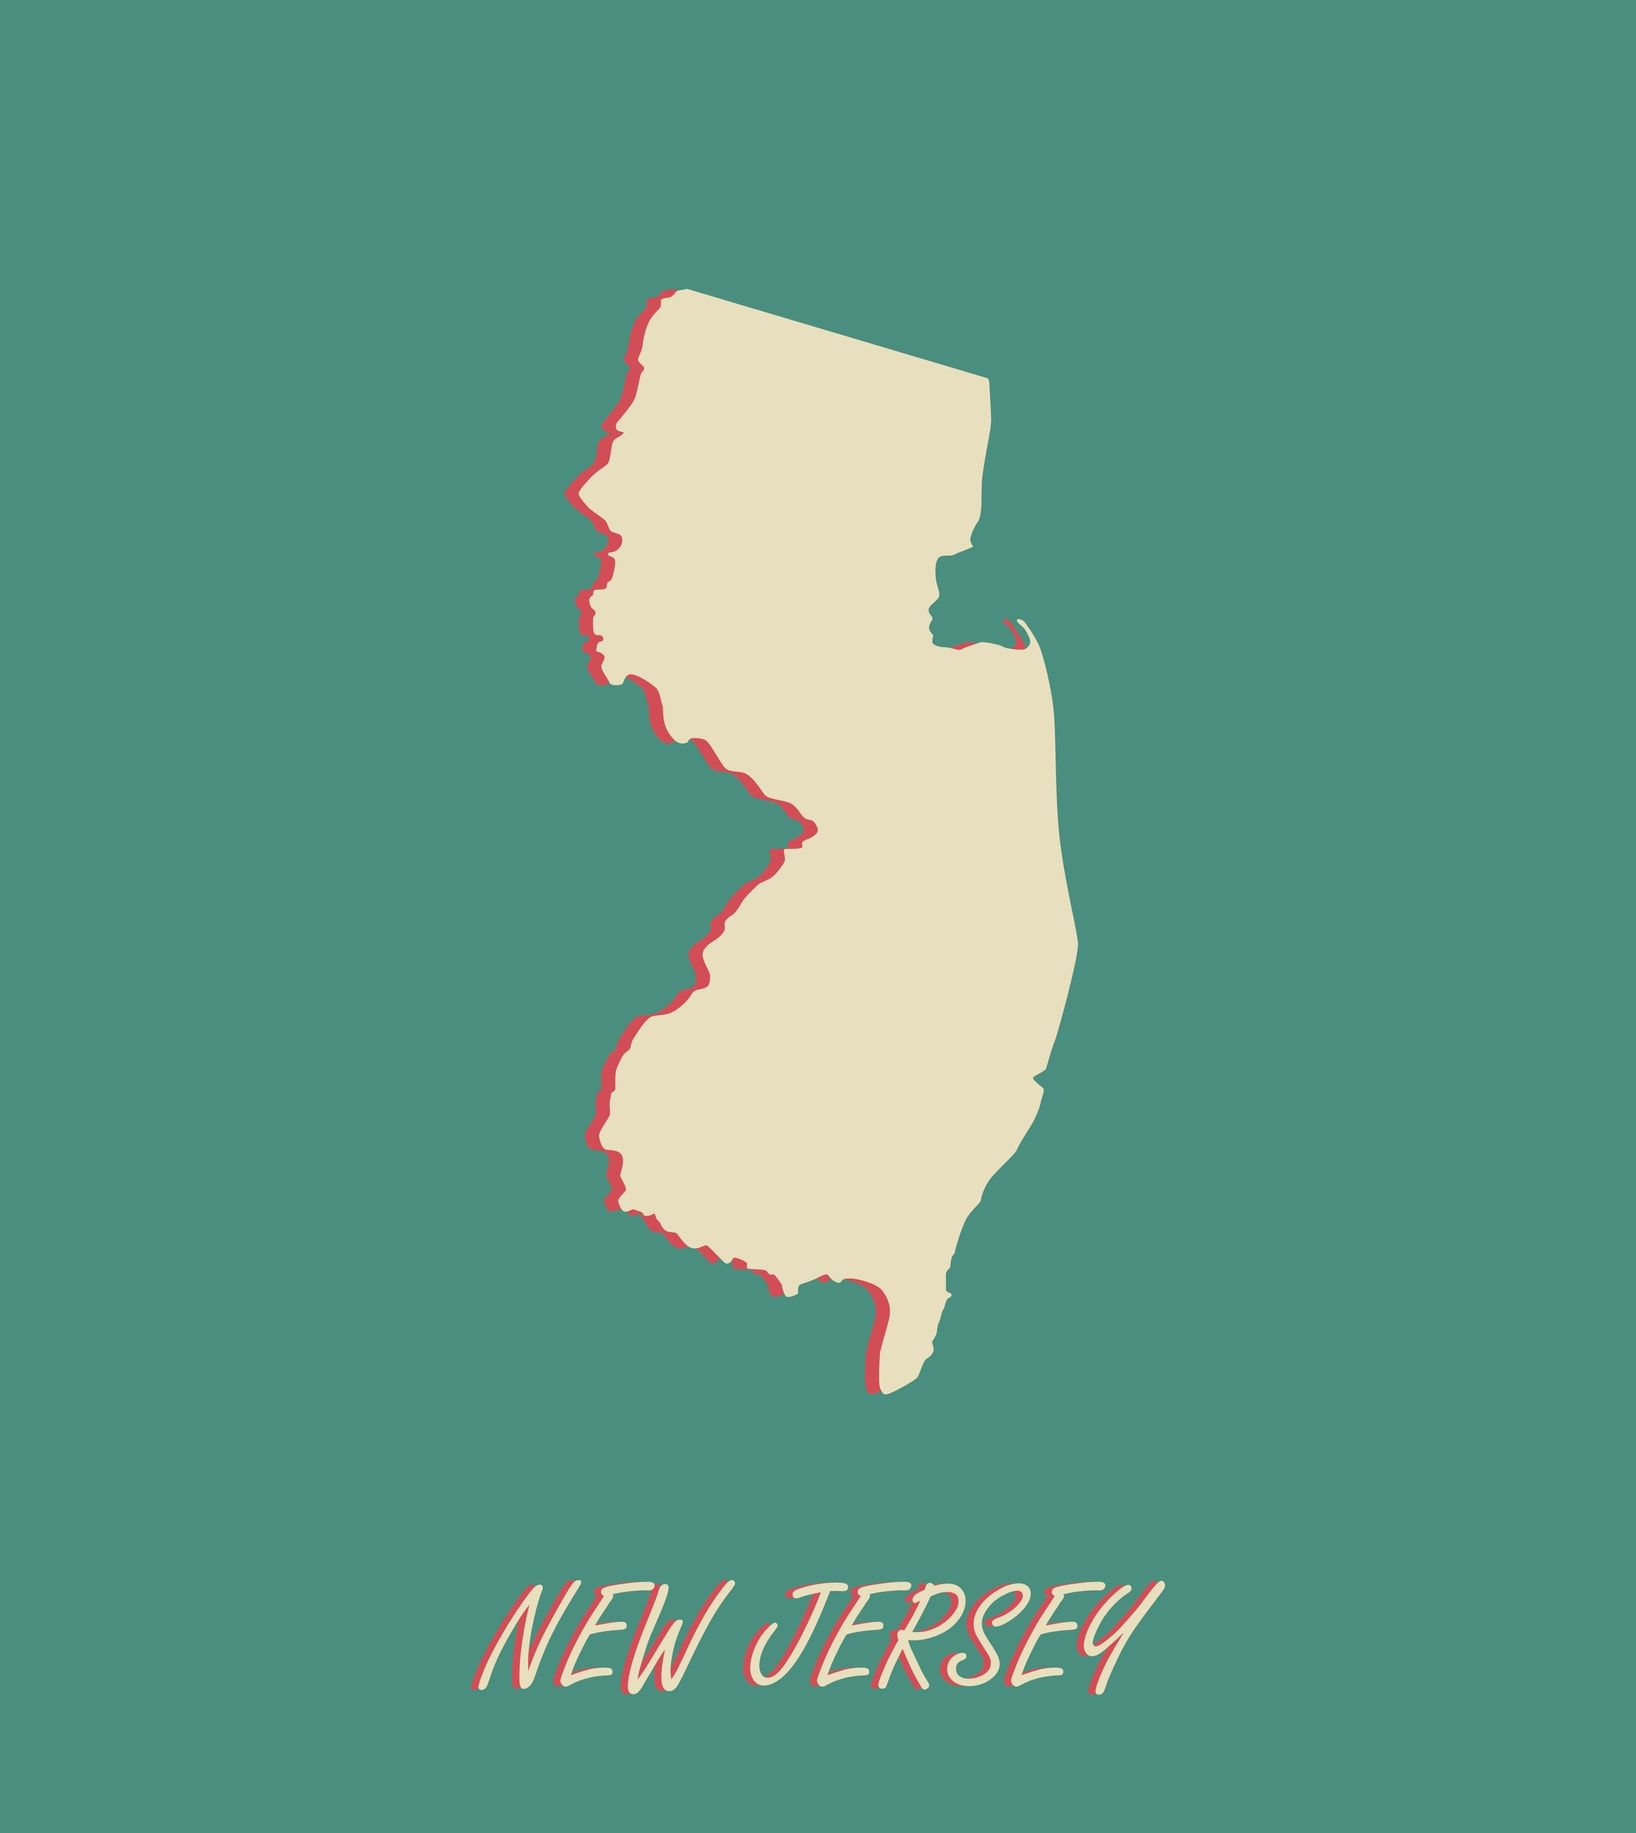 New Jersey household employment tax and labor law guide